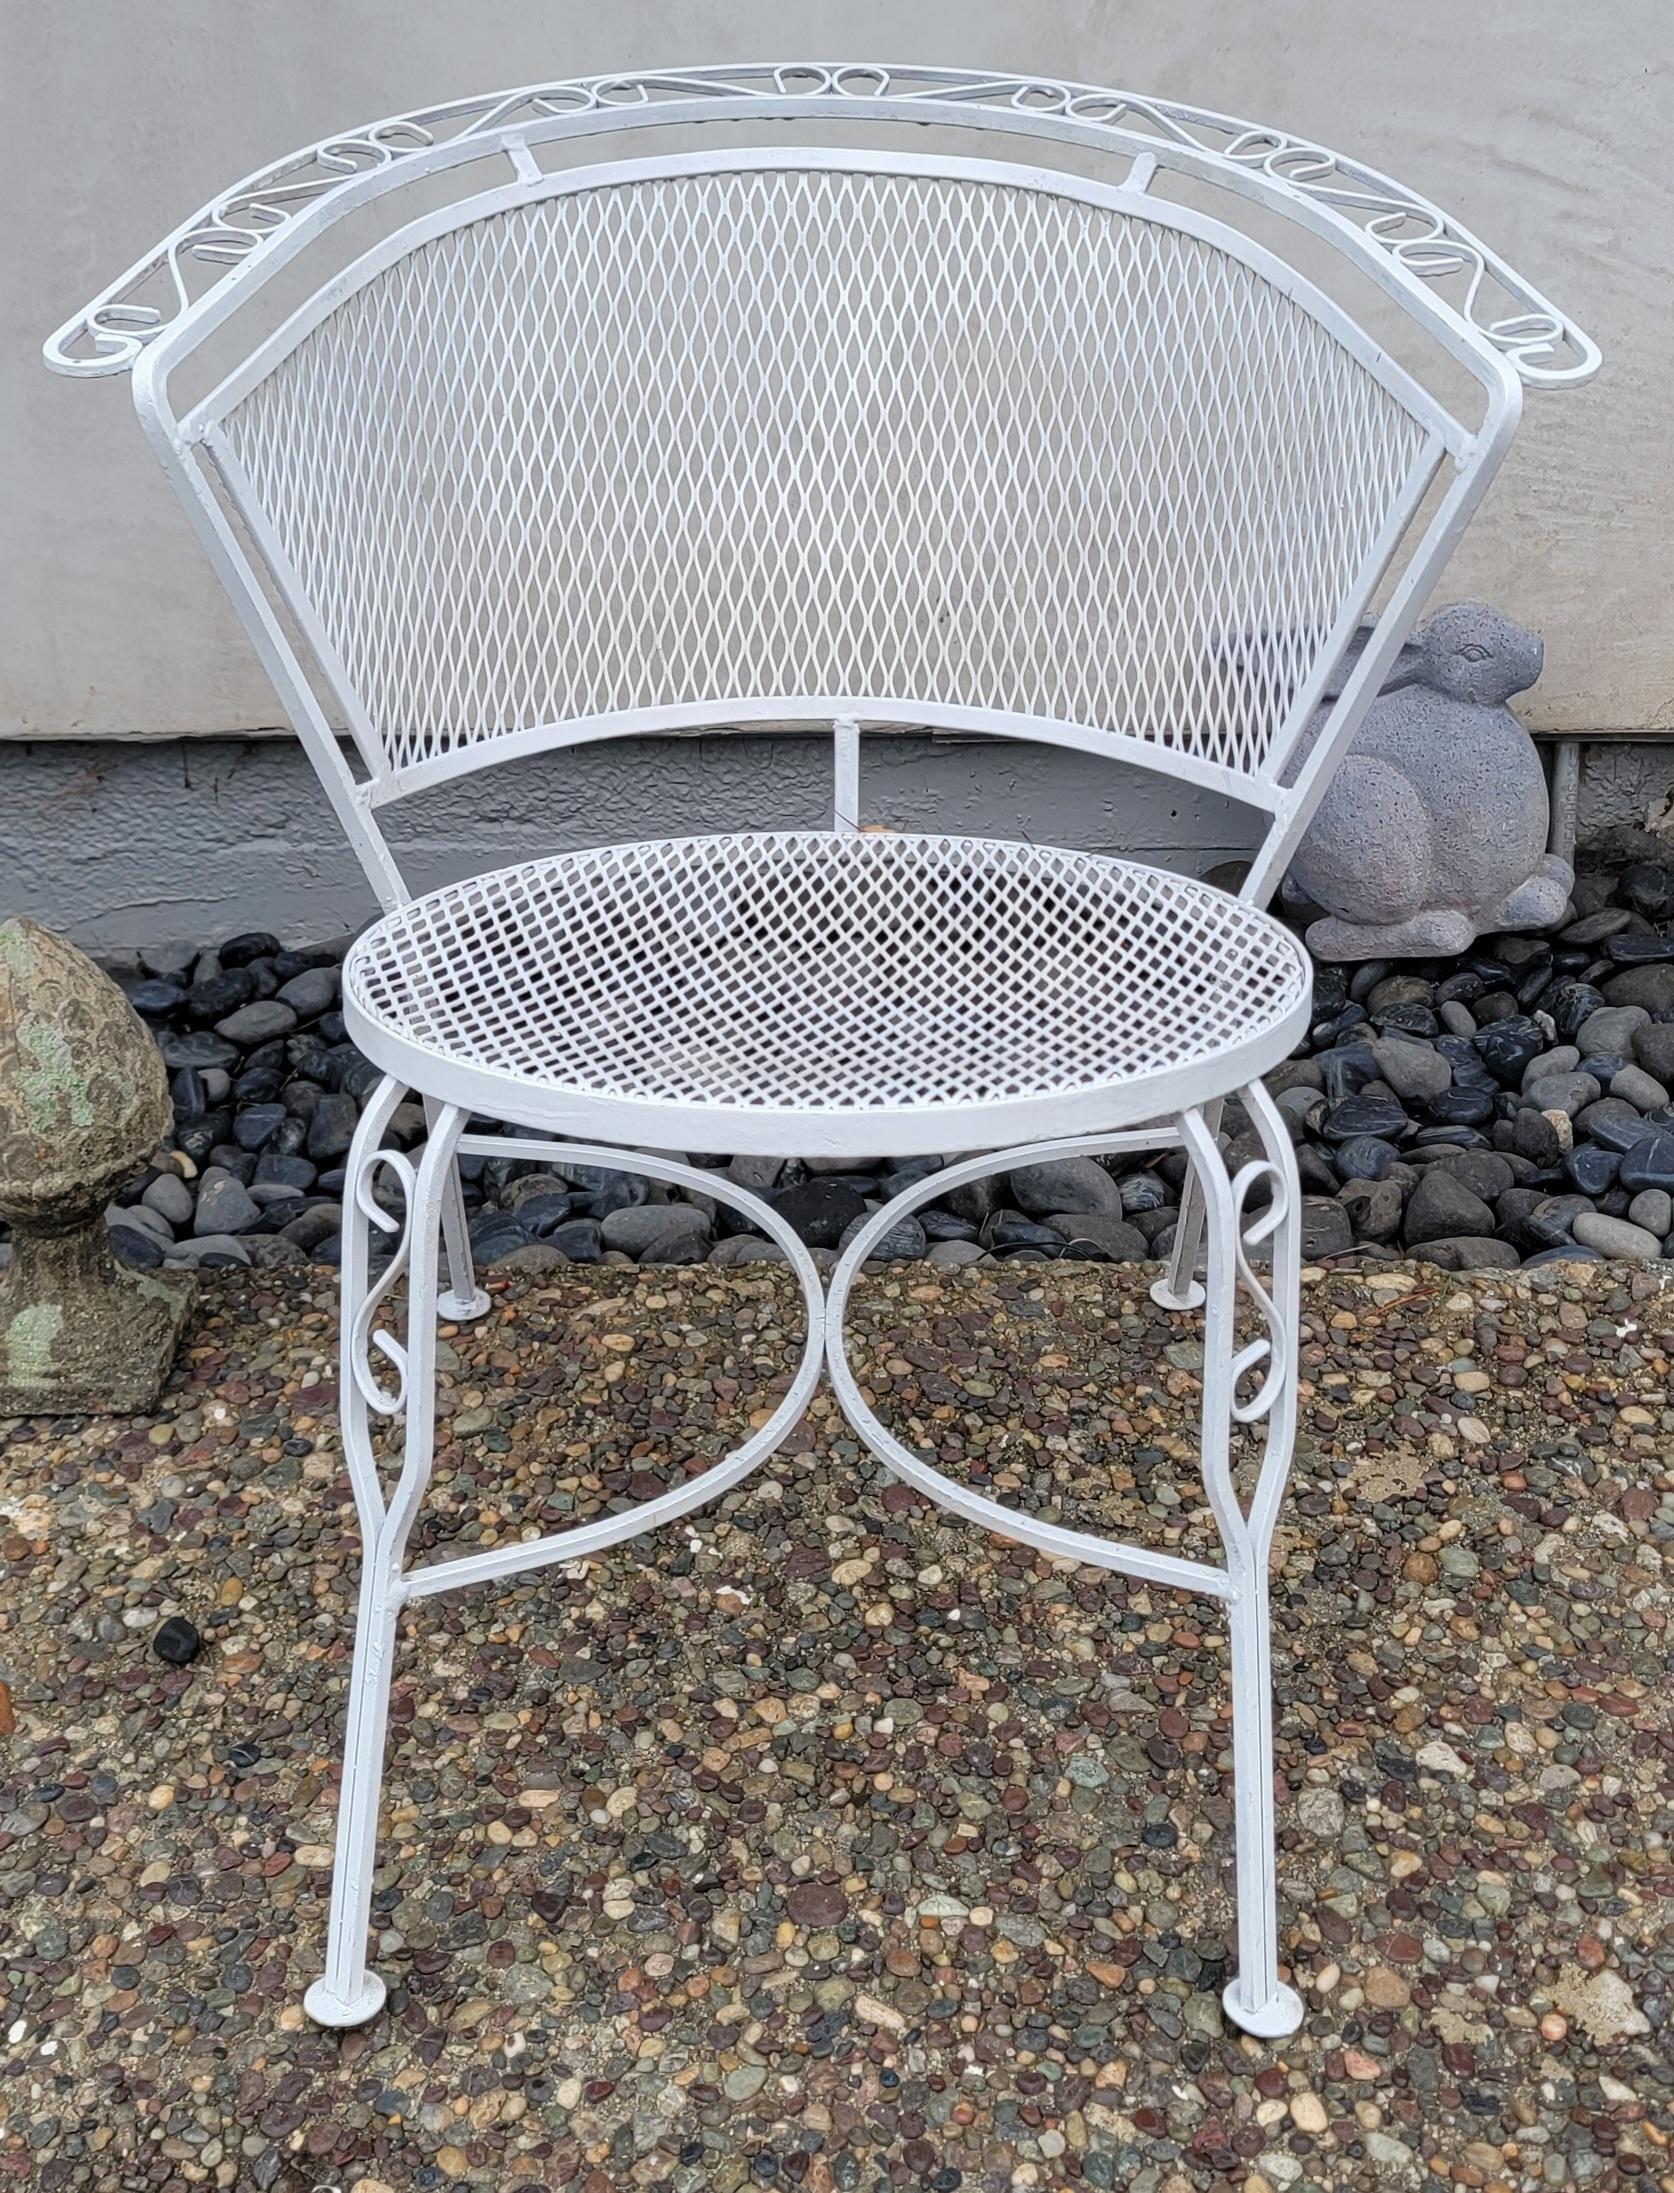 20th Century White Painted Metal Table & 2 Chairs For Sale